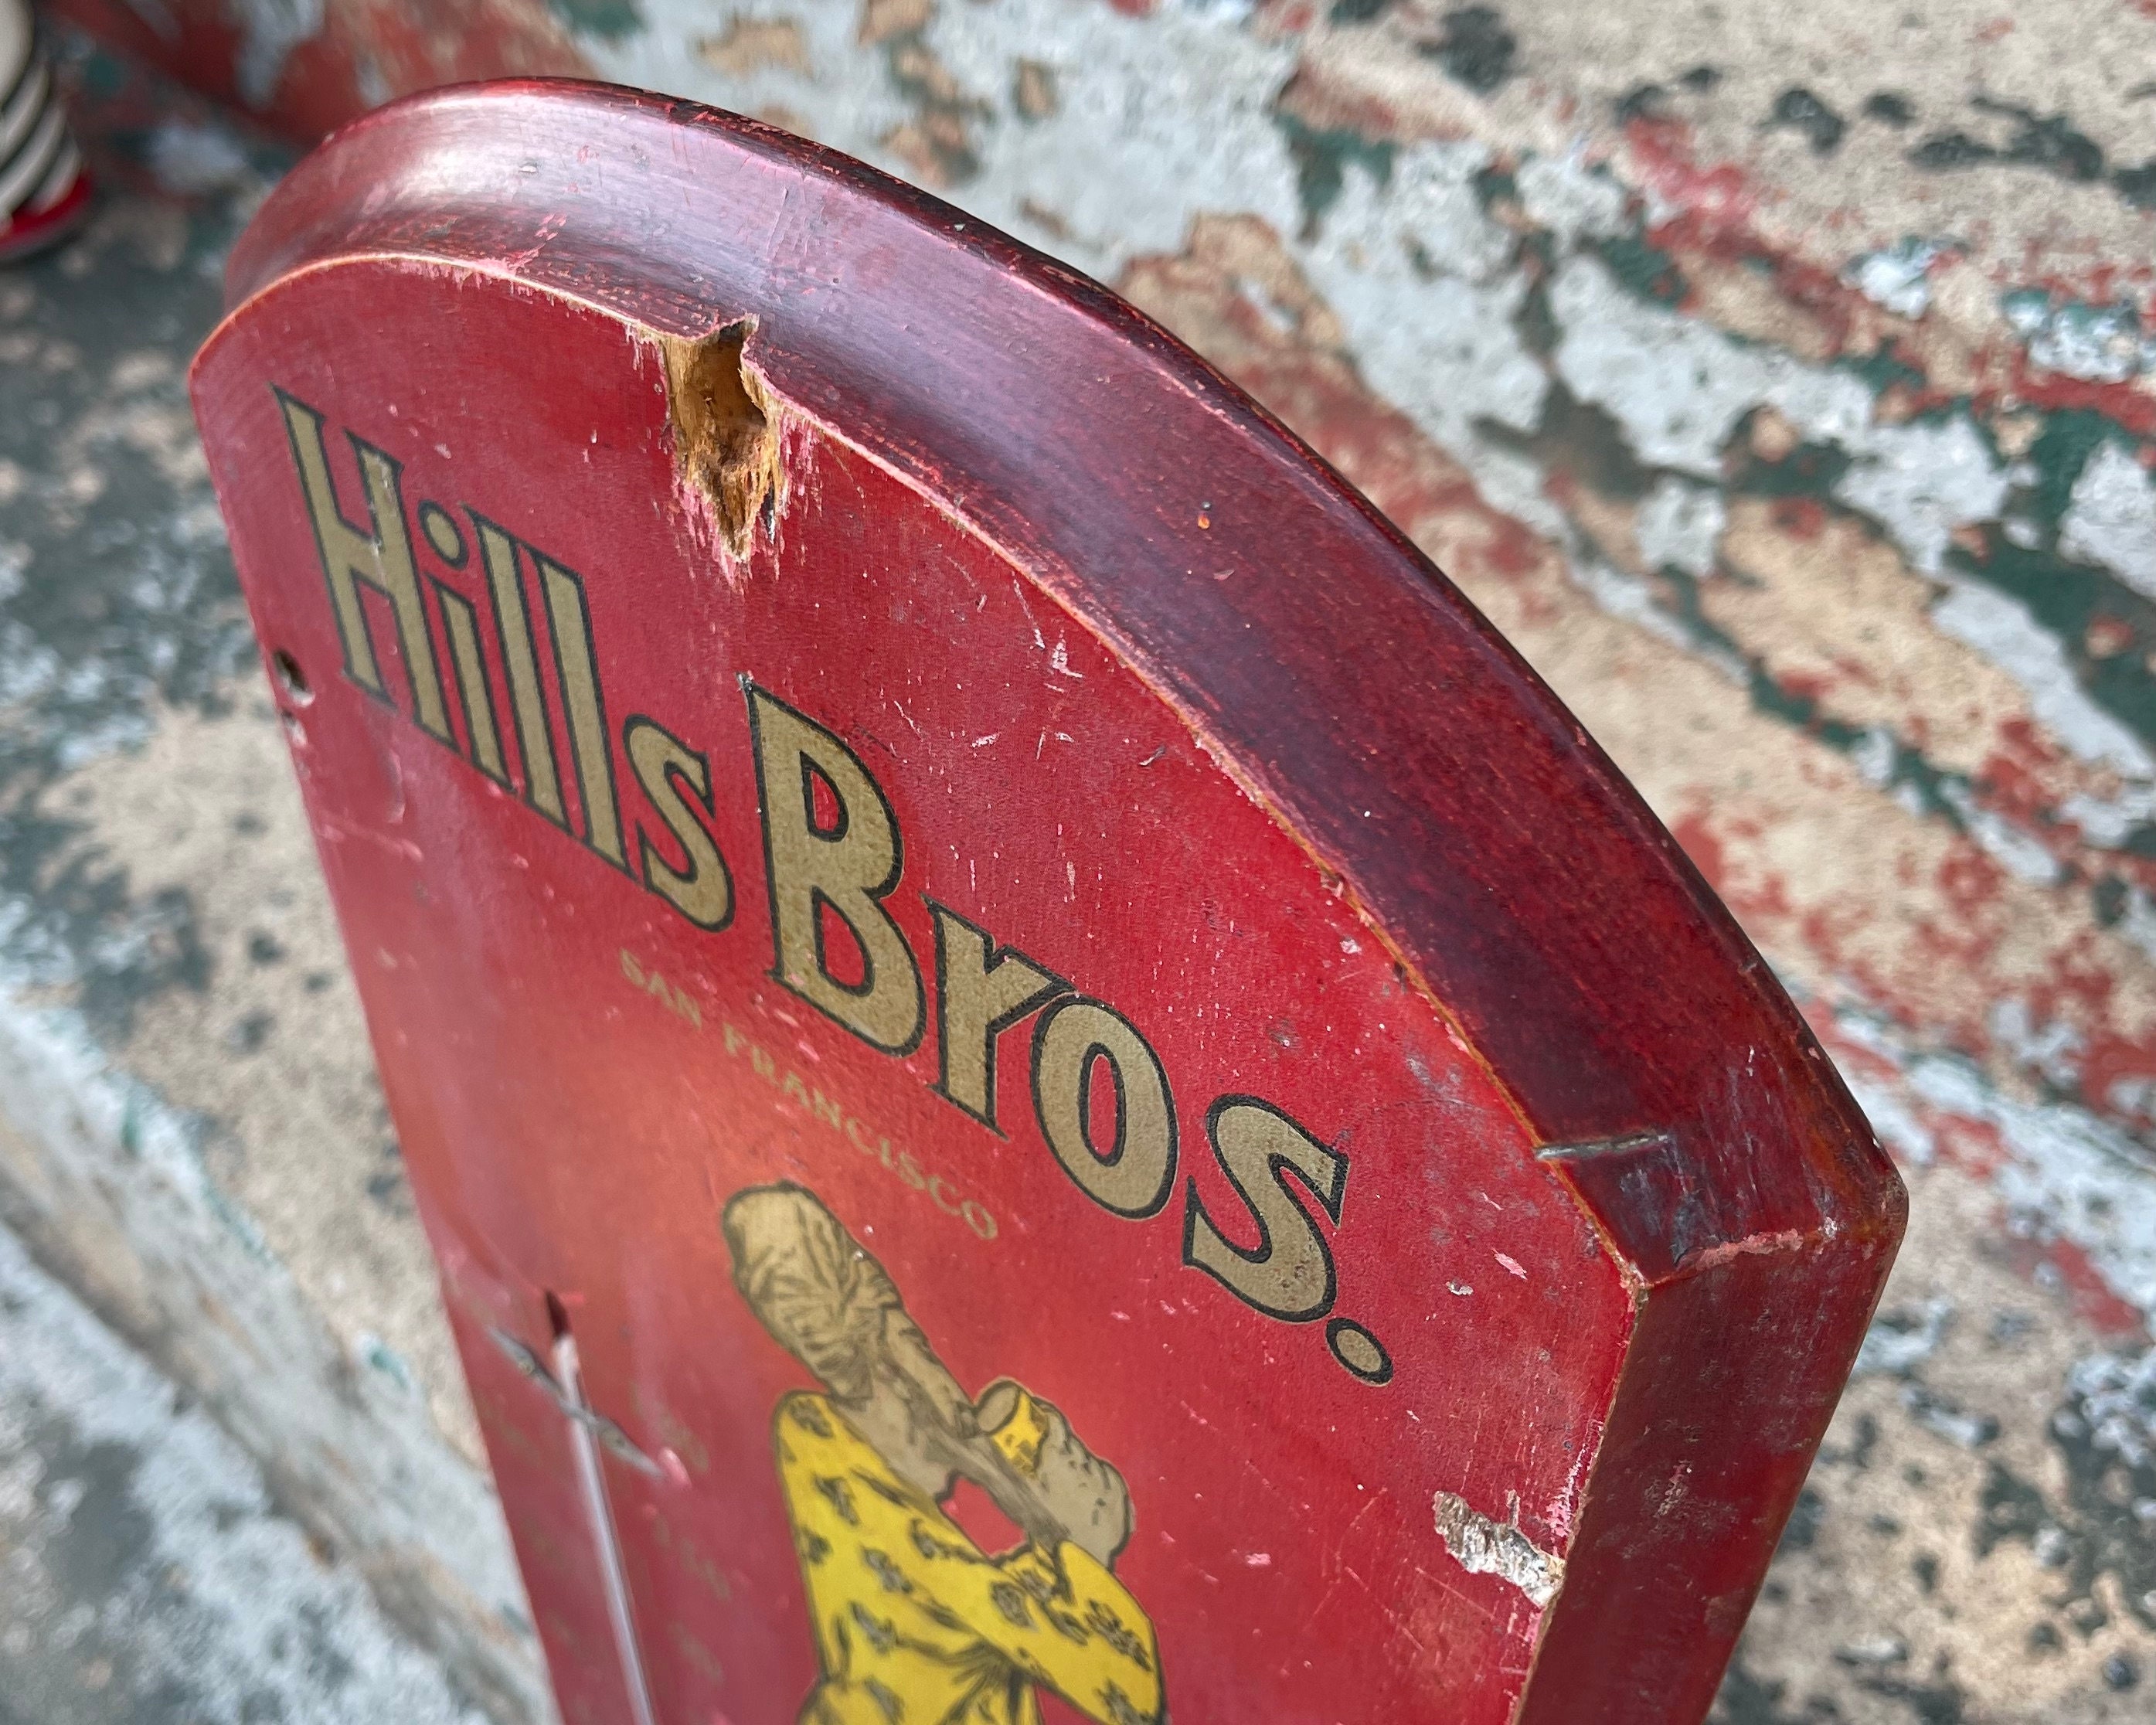 Buy Antique Hills Bros Coffee Wooden Advertising Thermometer Sign, Vintage  Coffee Shop, Coffee and Teas, San Francisco California, Wall Decor Online  in India 